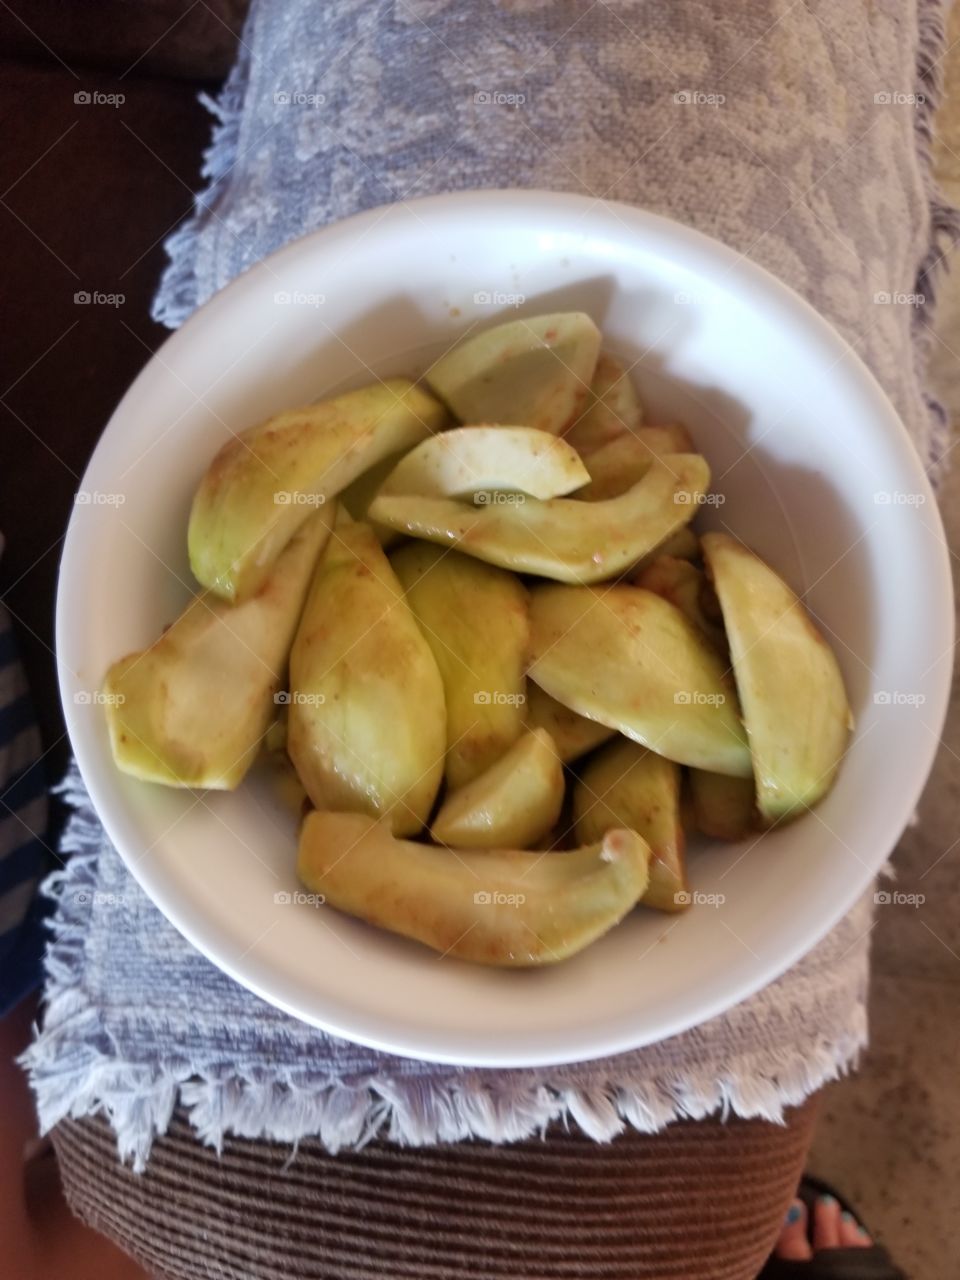 Mangos in Chili desert and limes from El Salvador